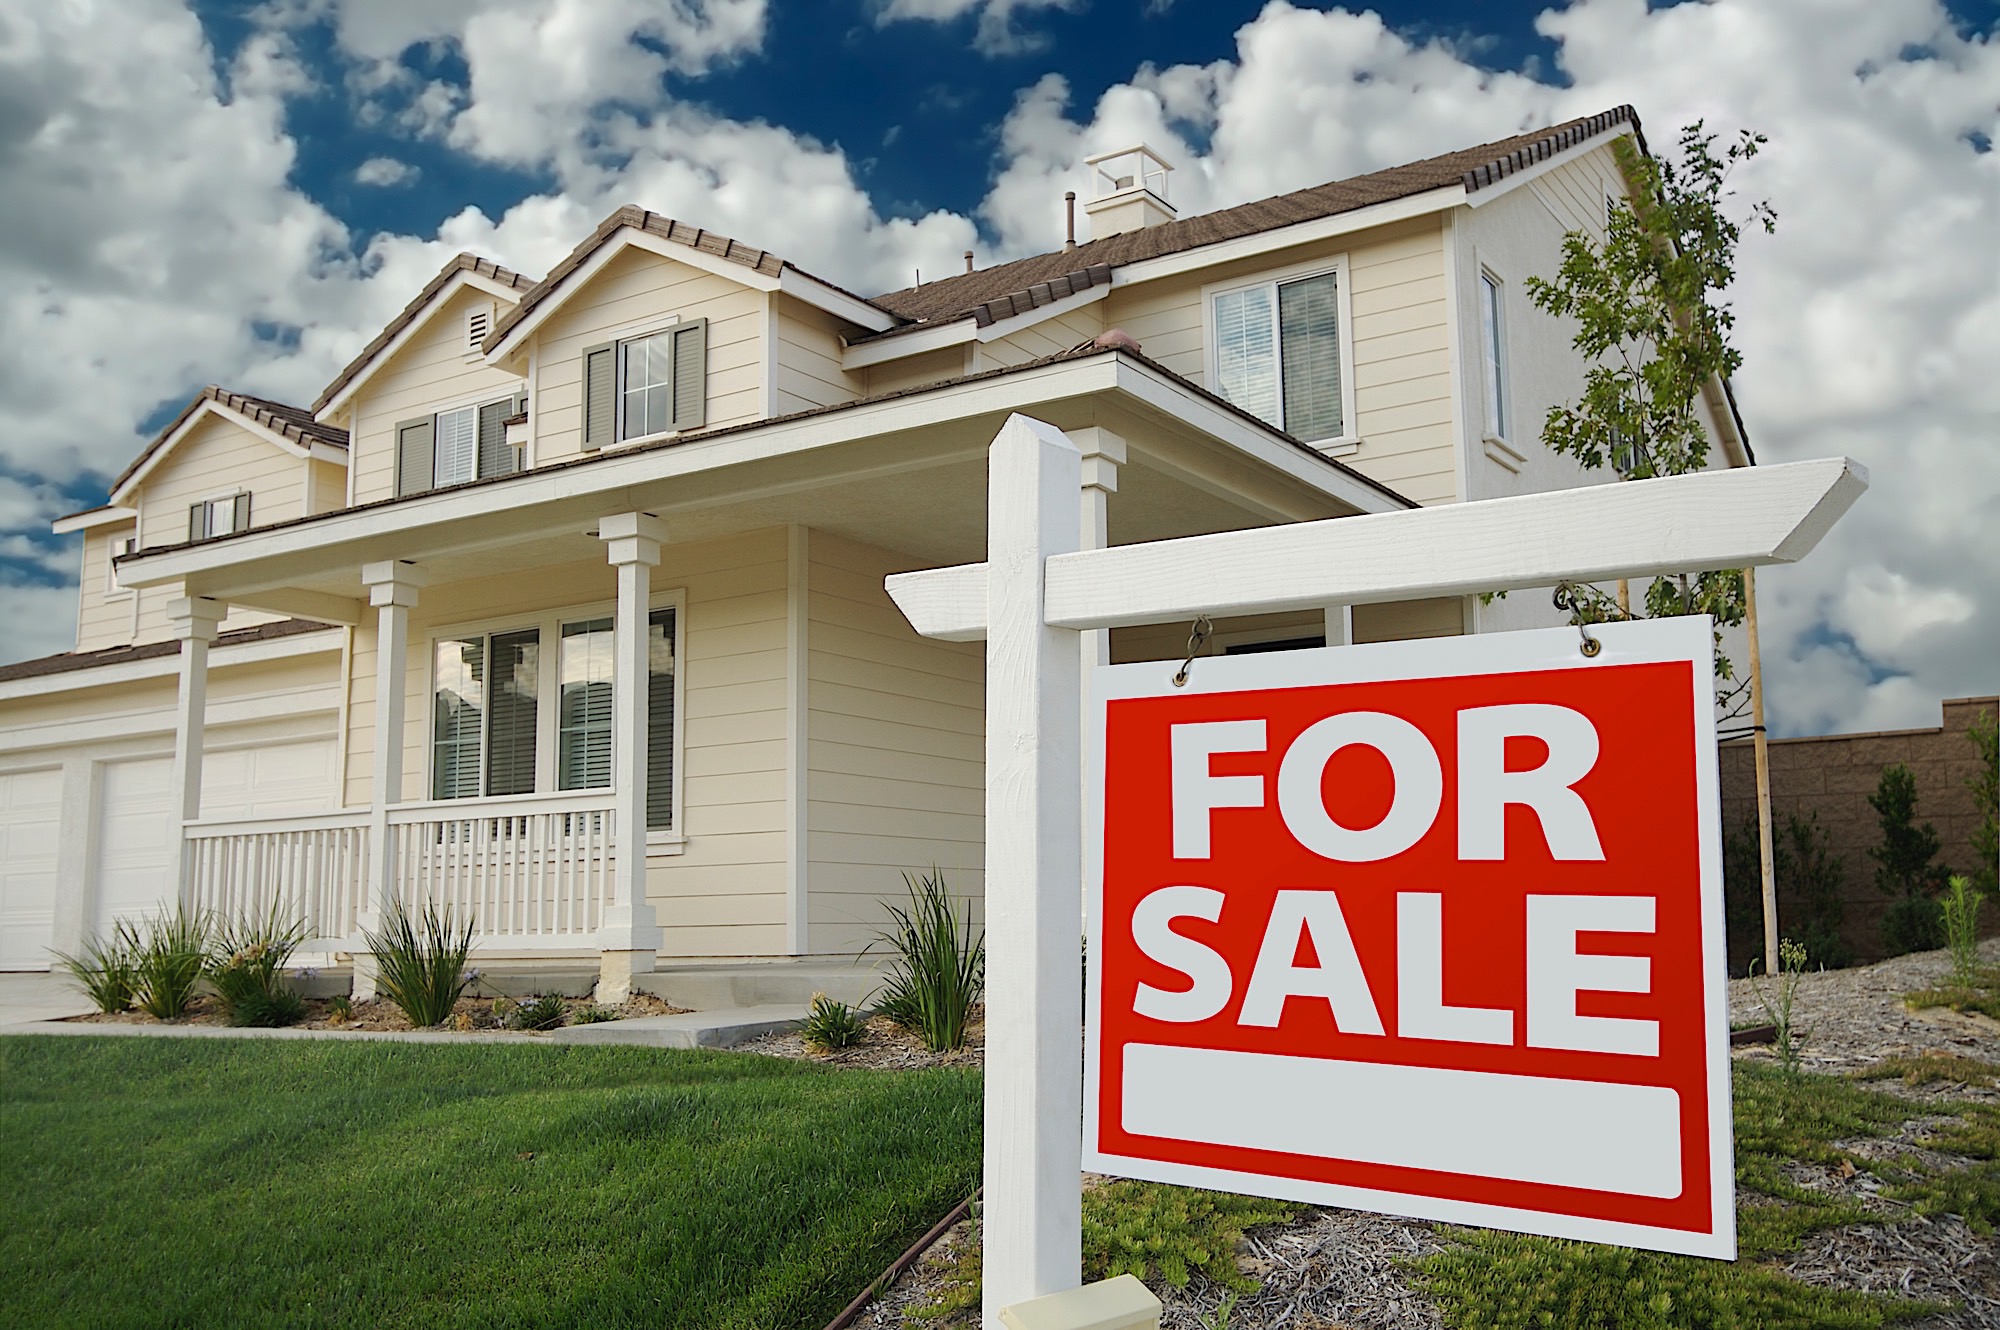 Lien, Mortgage, and Financial Implications of Selling a House During Divorce